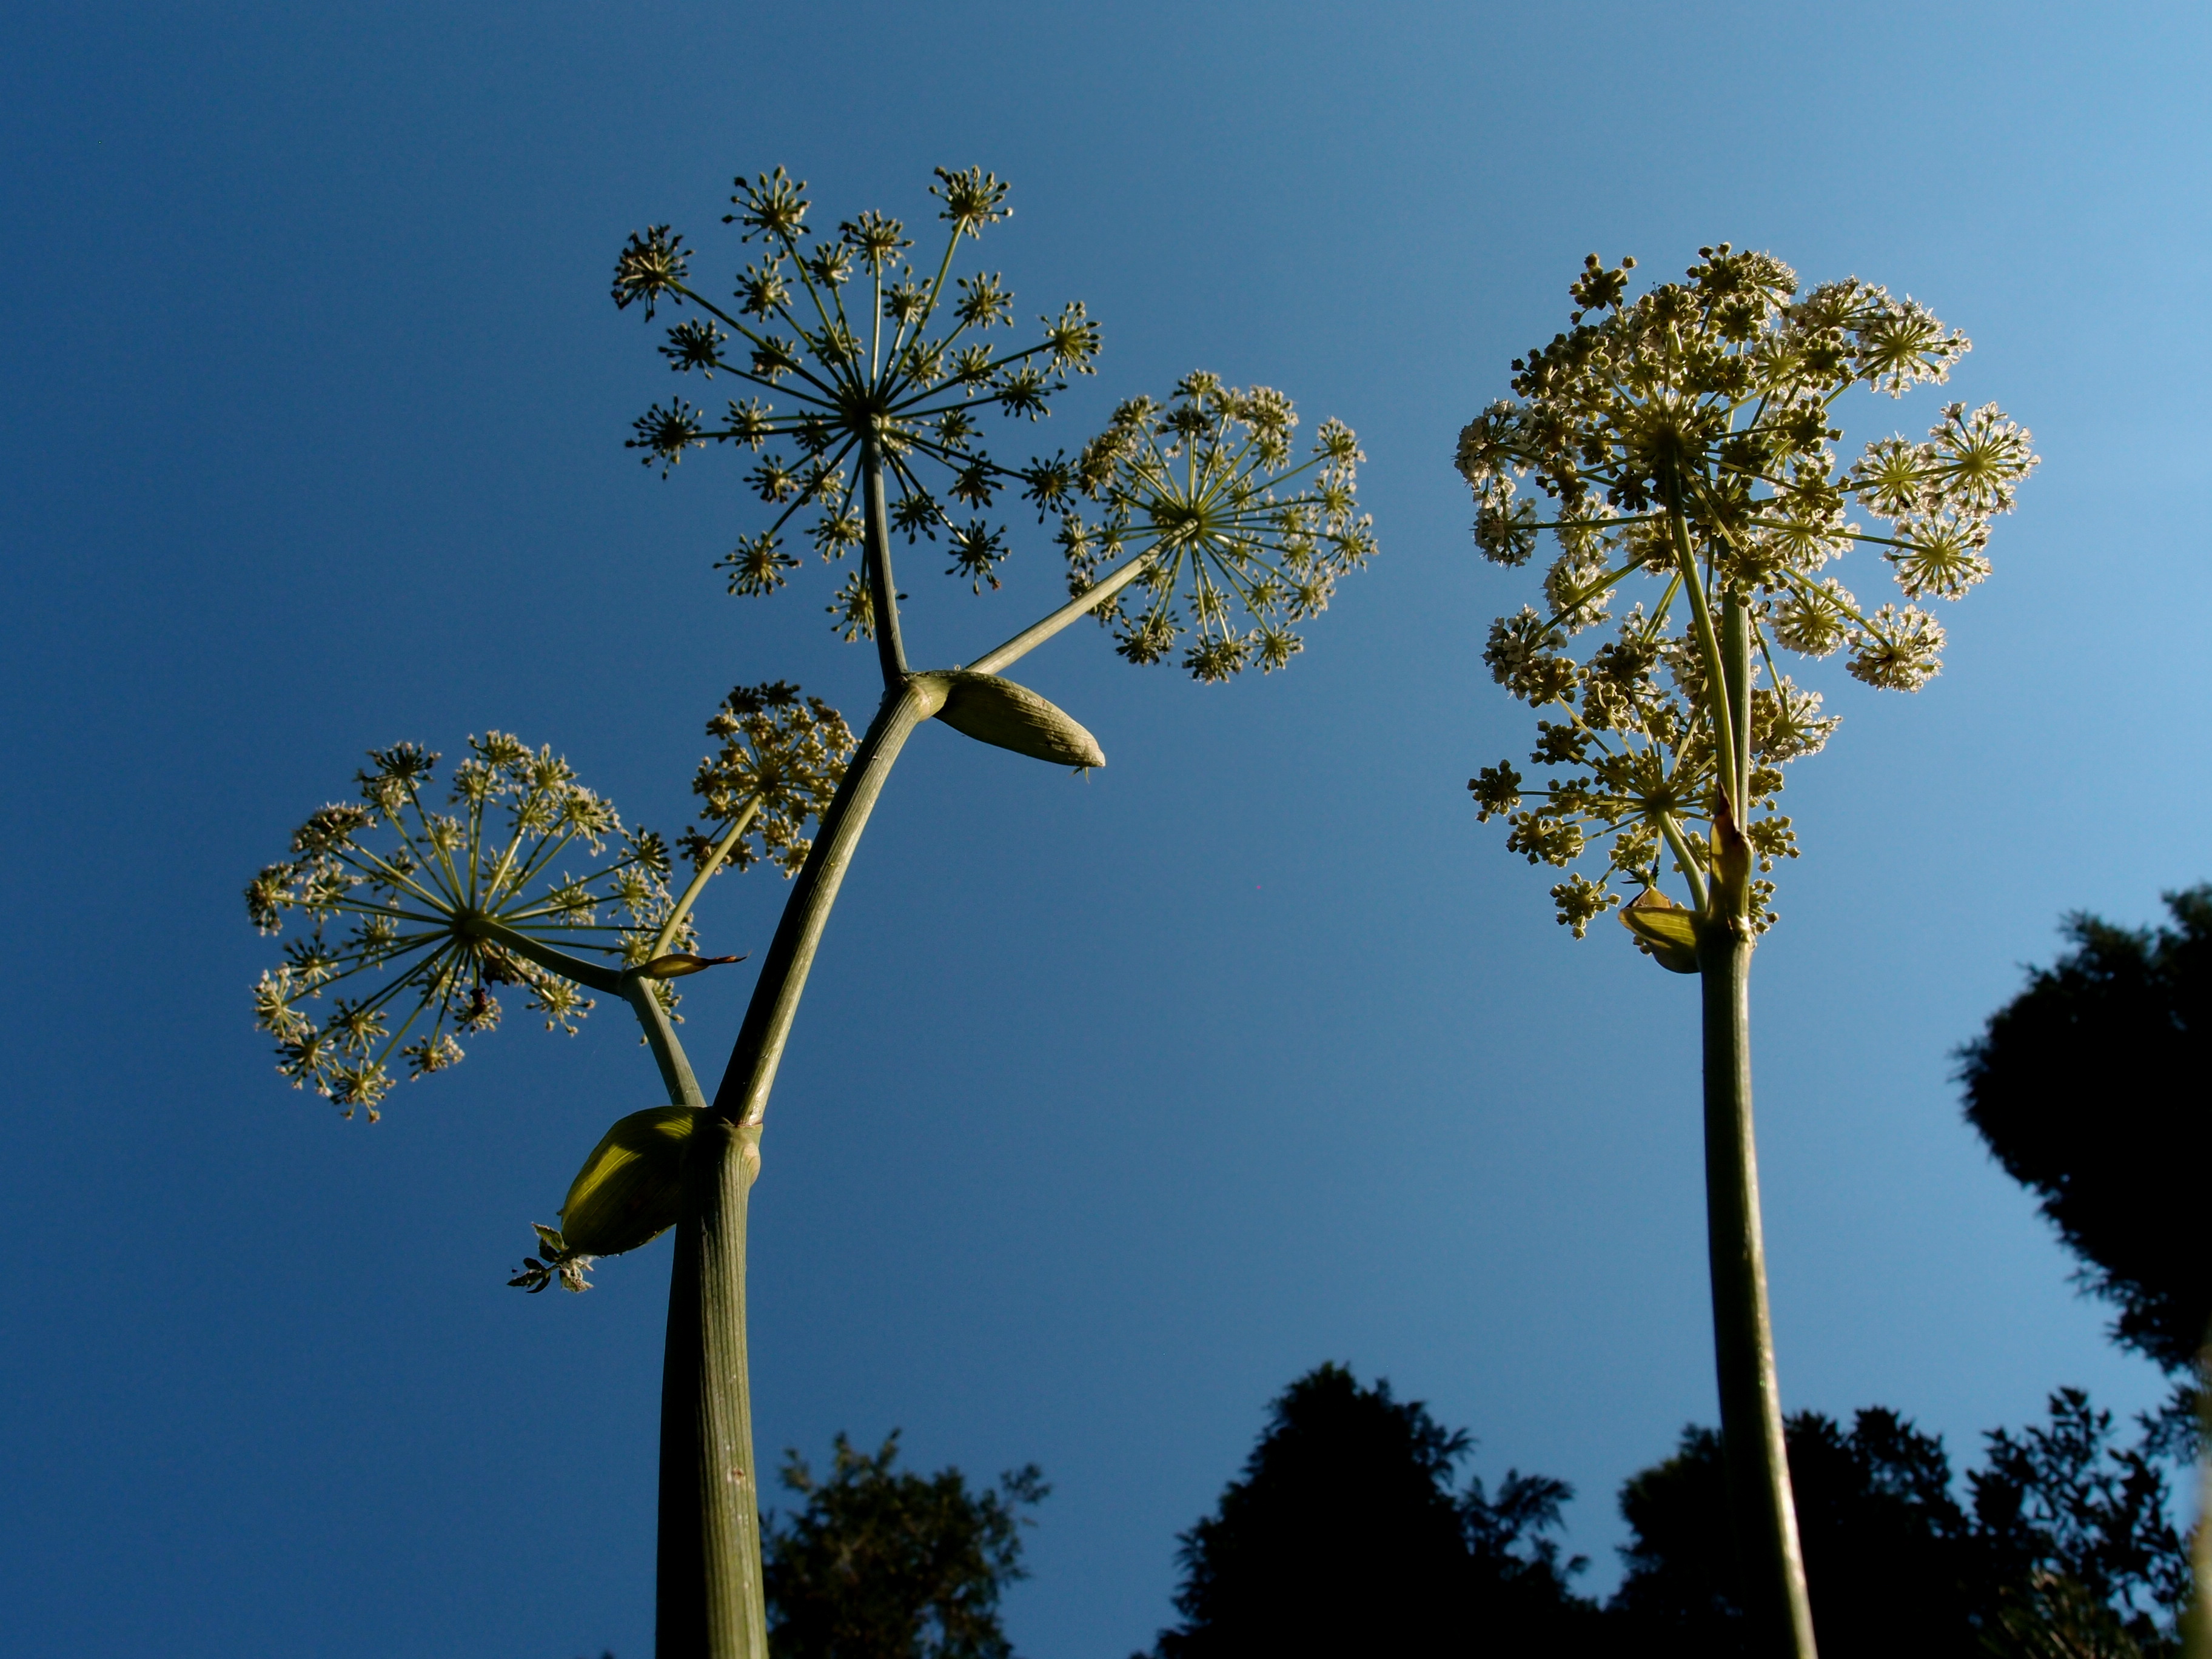 Three plants with white flowers against a blue sky.